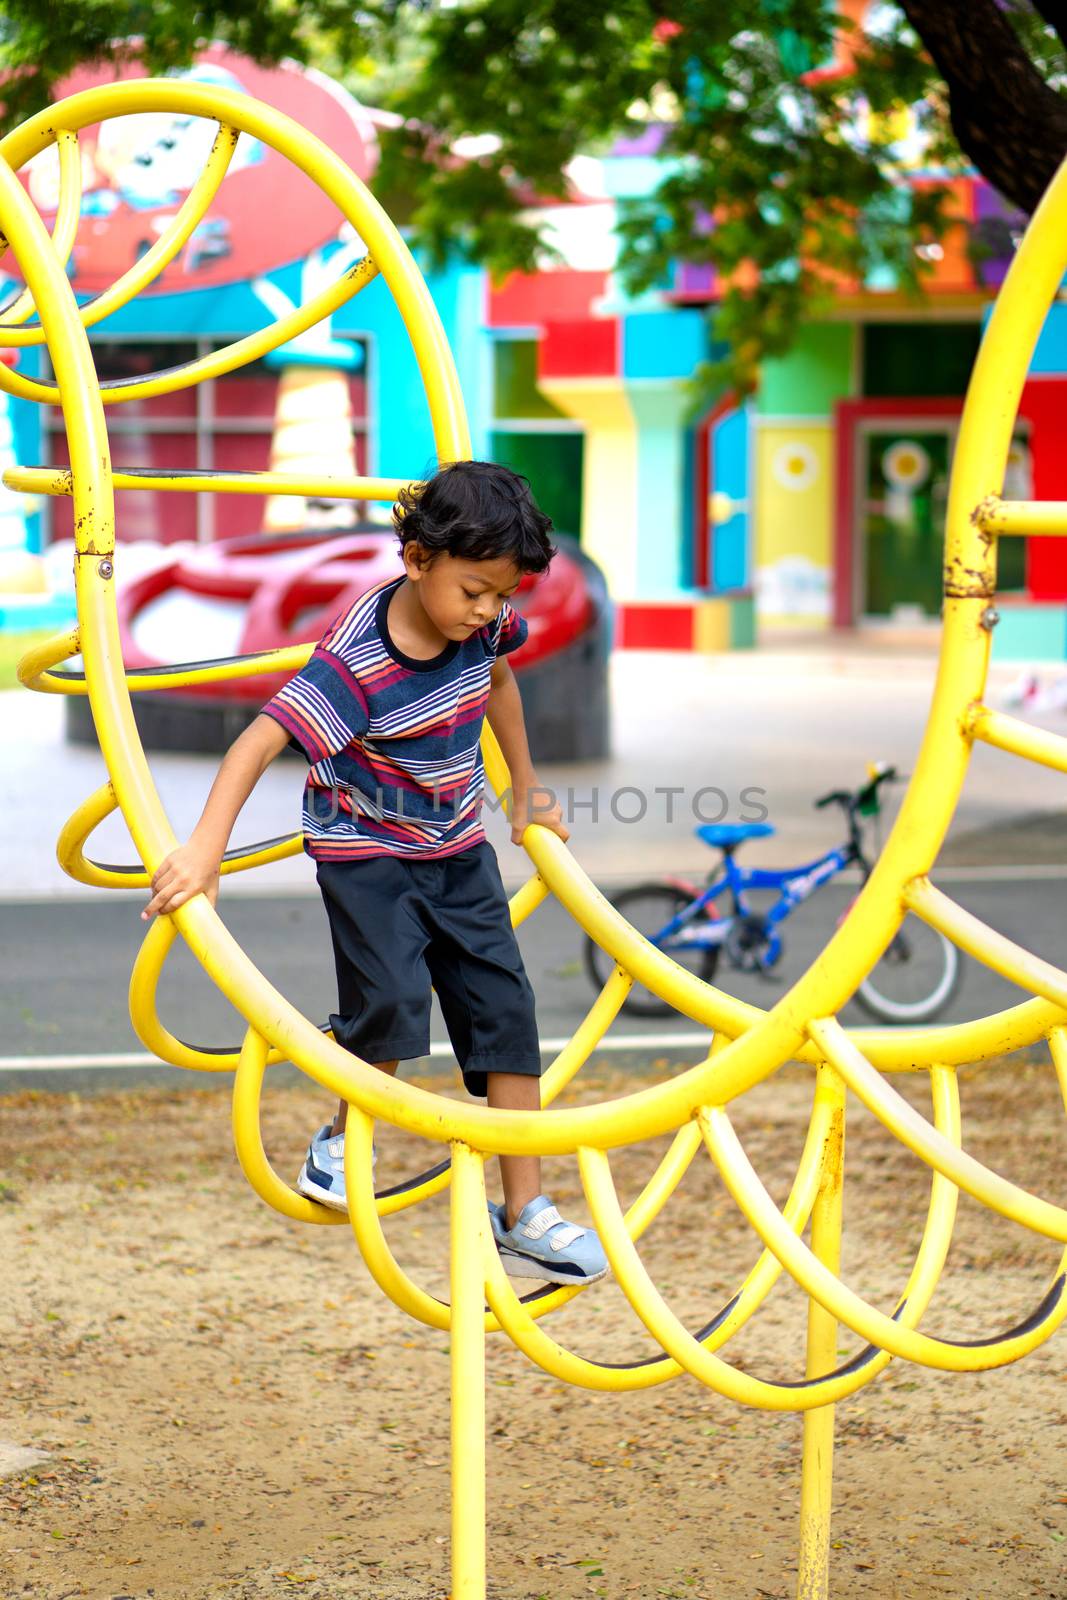 An Asian boy is climbing on a playground equipment in a school.